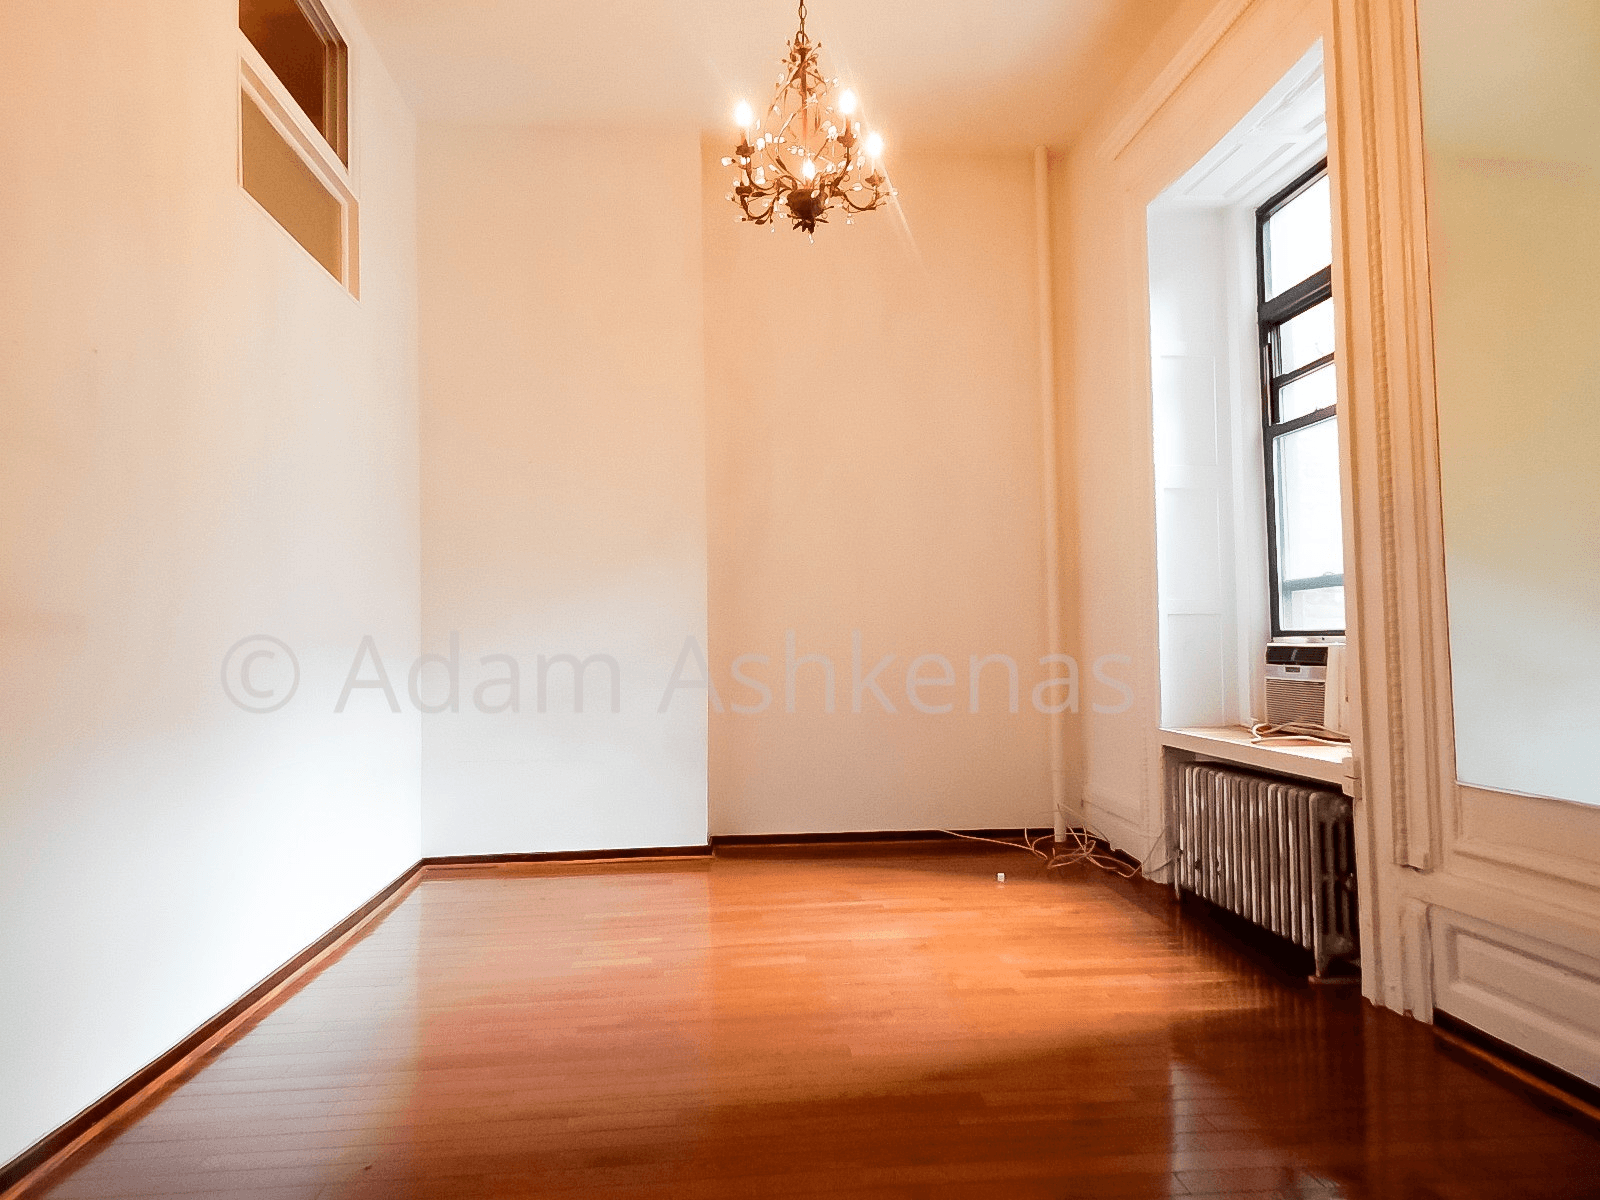 Just listed at 140 West 75th Street, New York, NYBright, big, and eclectic one bedroom apartment in Manhattan's Upper West Side.